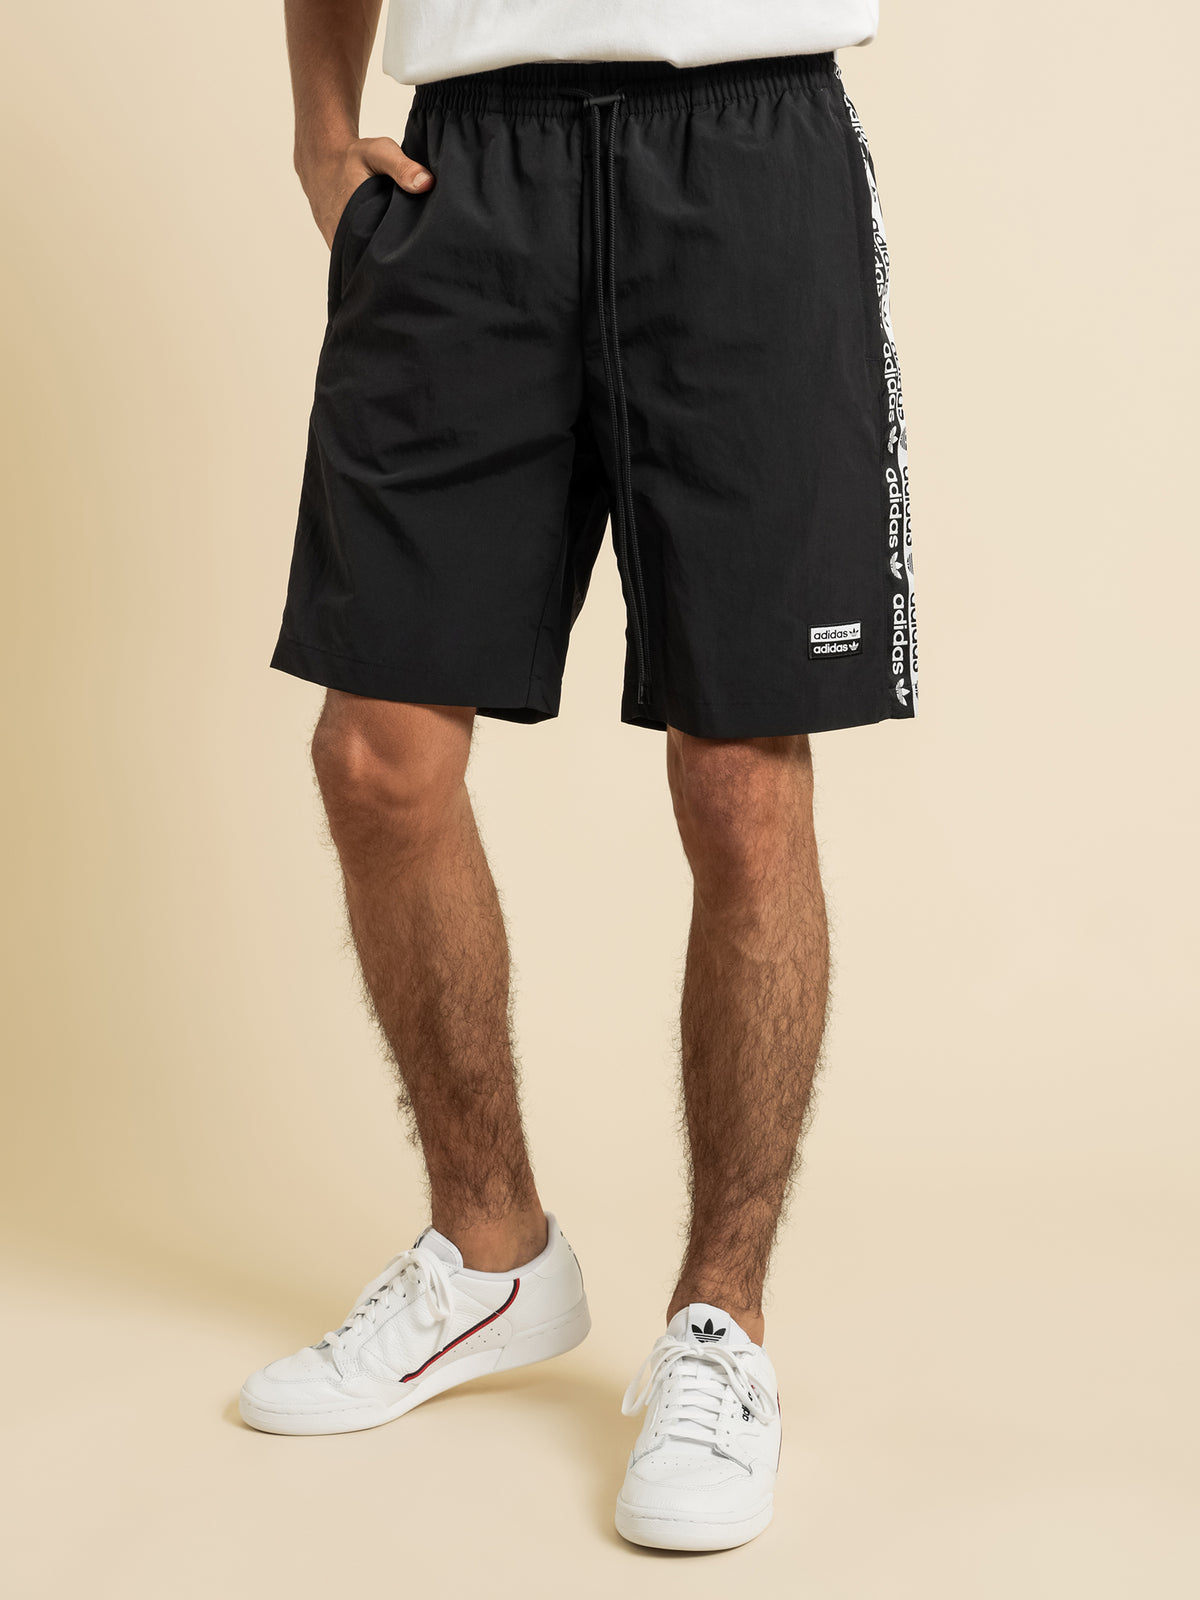 RYV Woven Shorts in Black